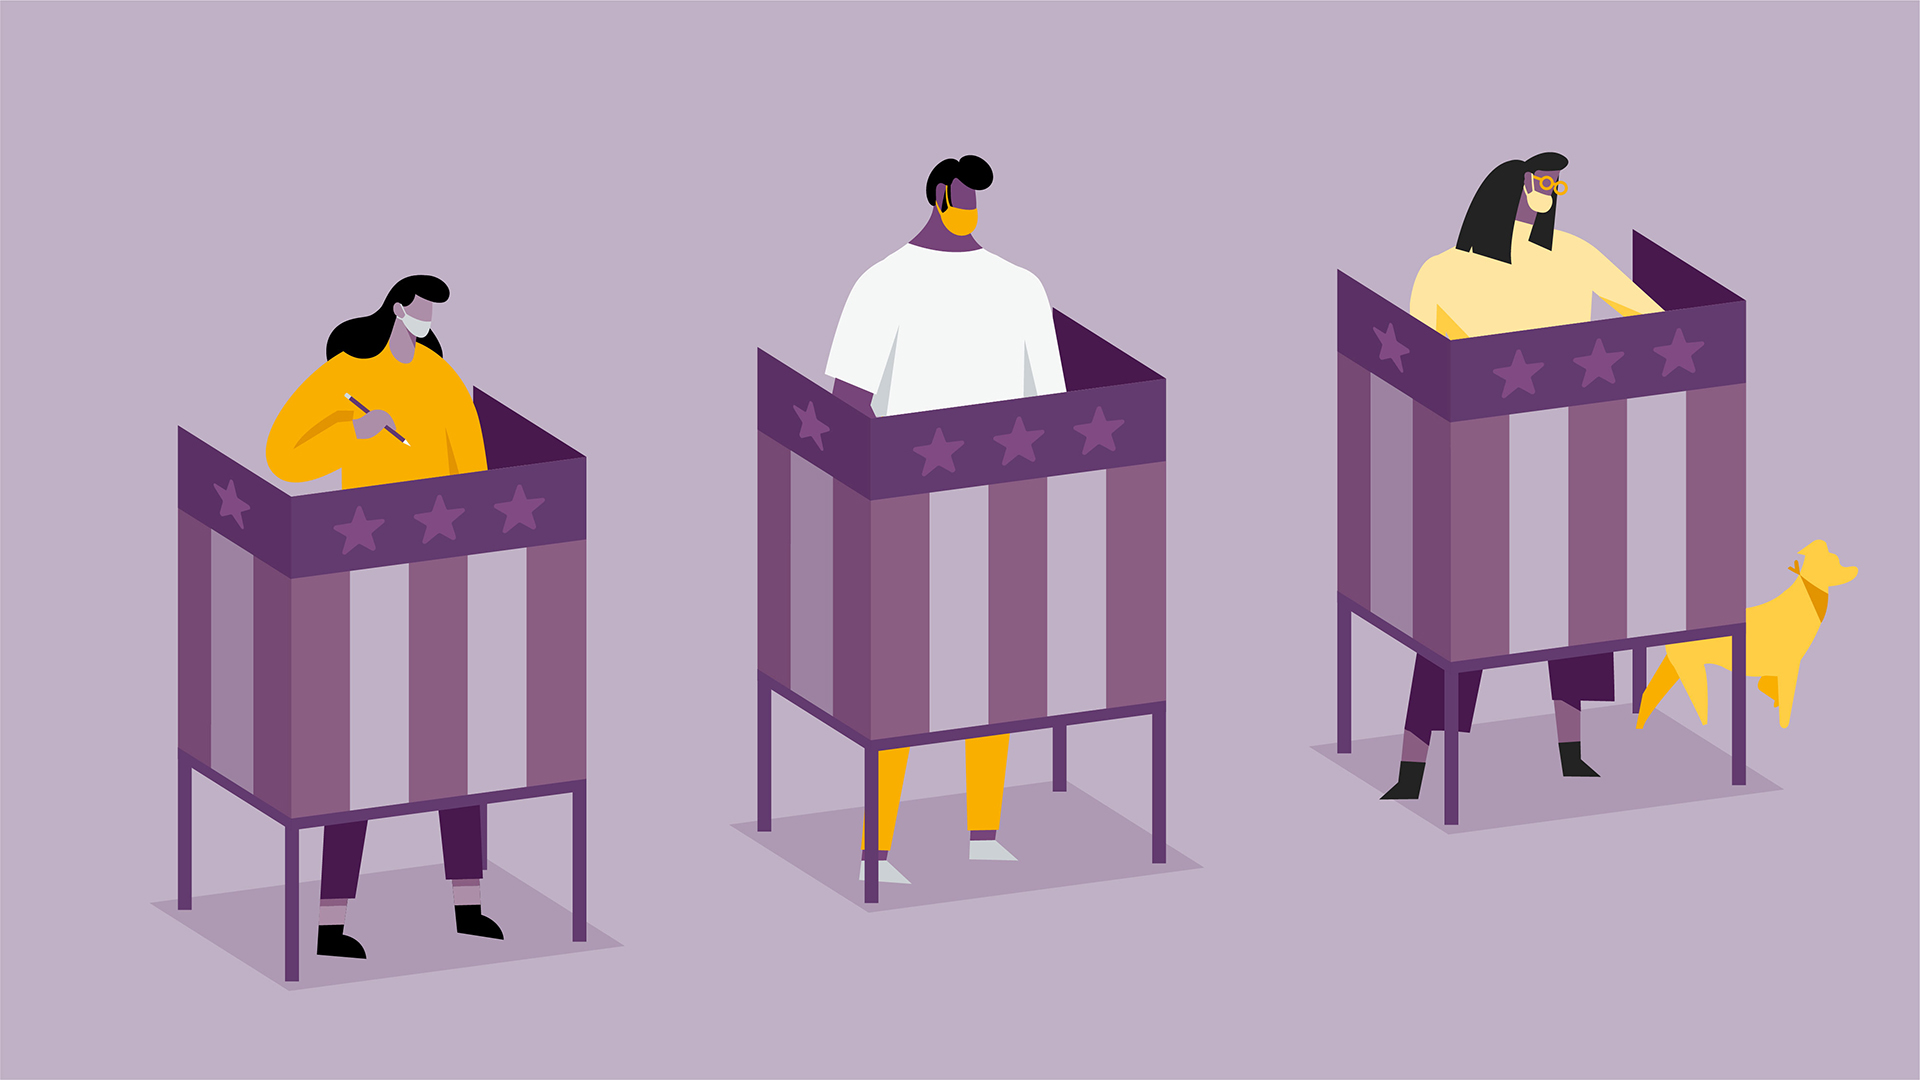 illustration of 3 people at the voting booth